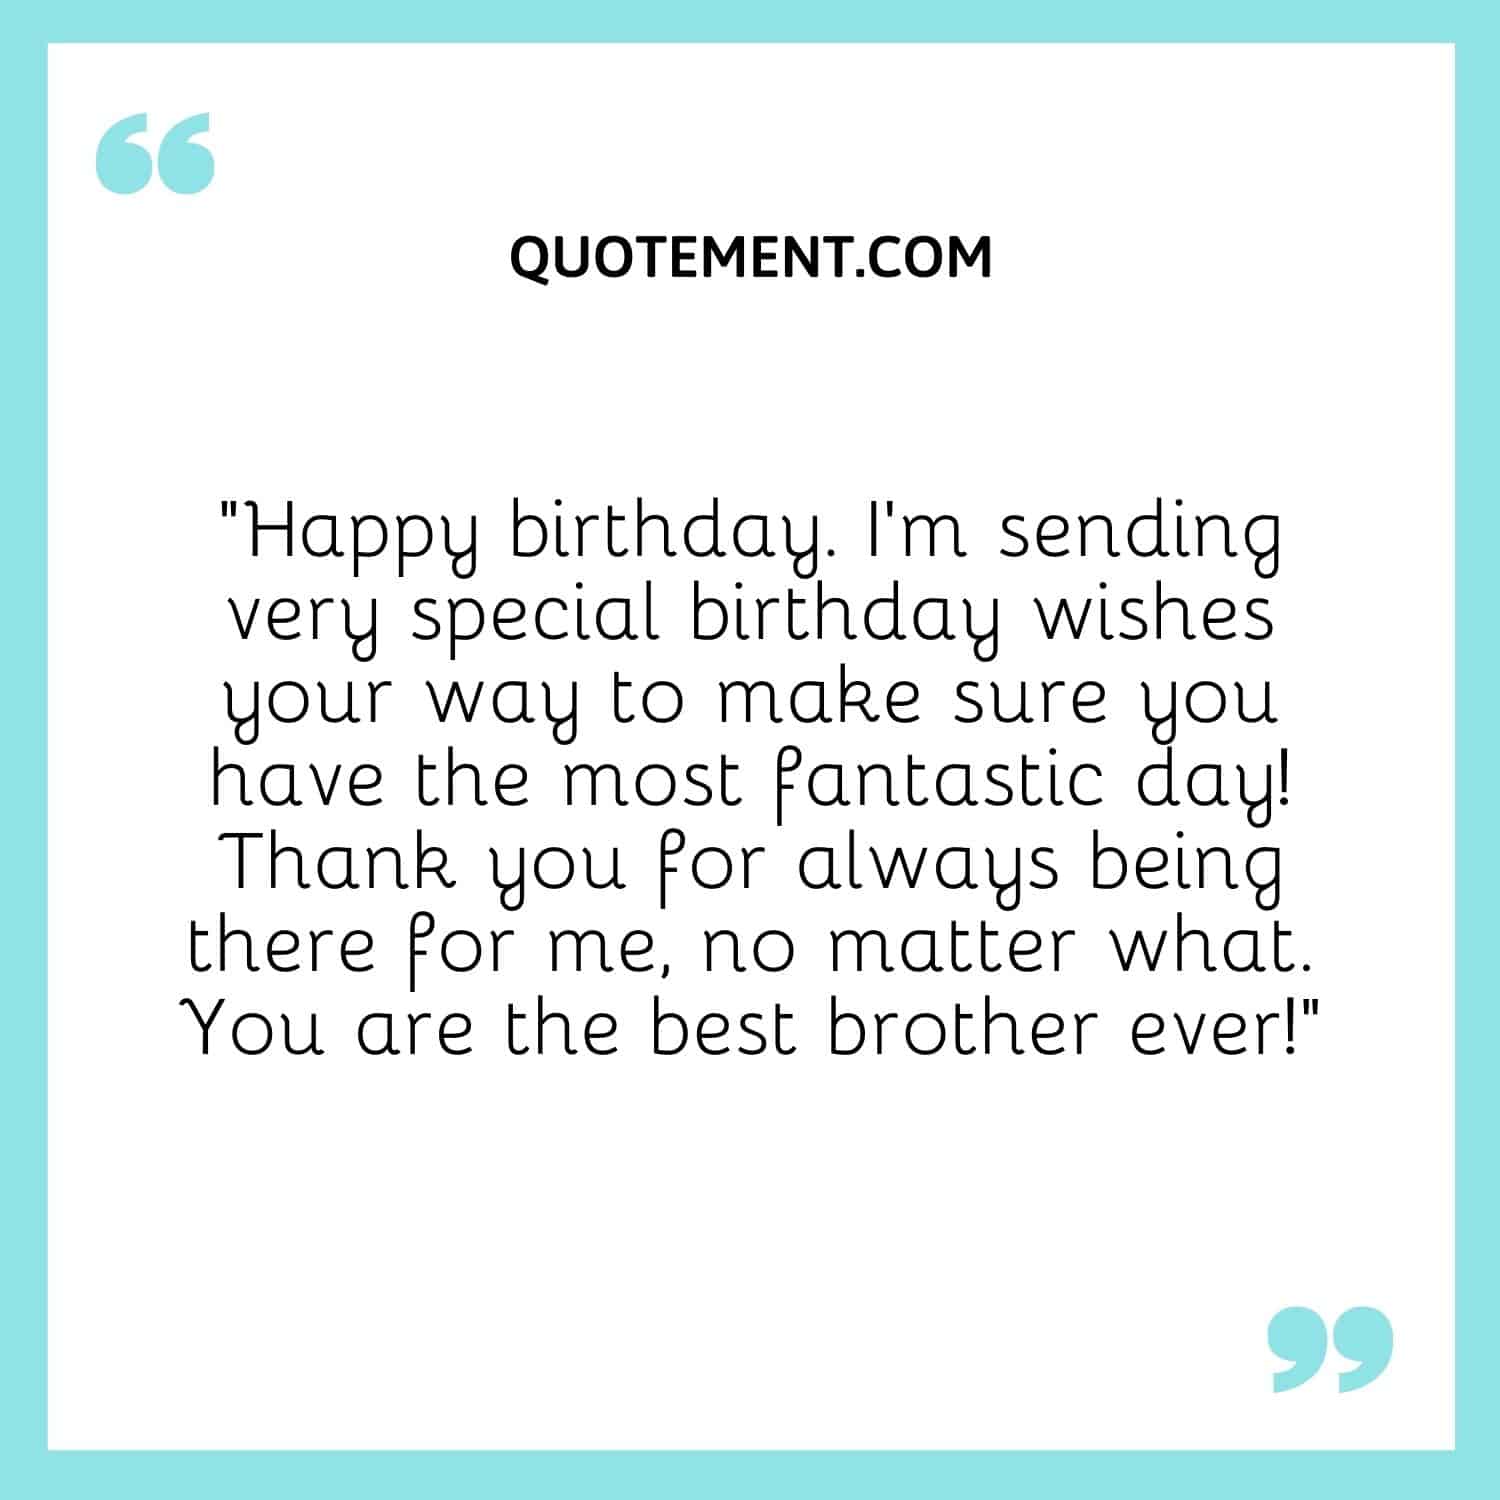 I’m sending very special birthday wishes your way to make sure you have the most fantastic day